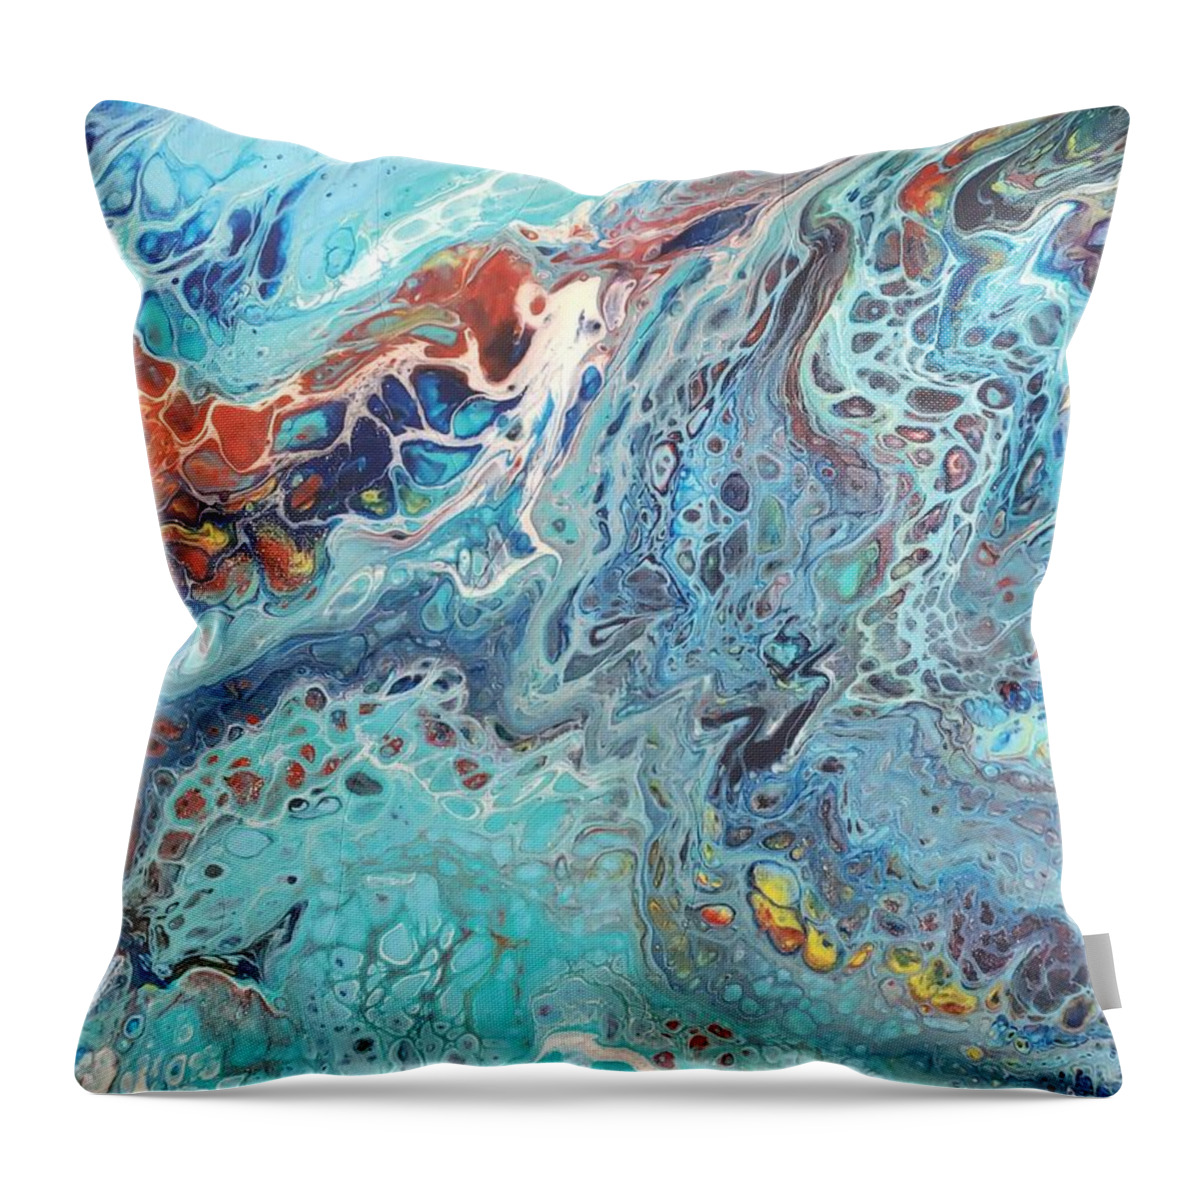 One Of A Kind Piece Throw Pillow featuring the painting Glitter by Michelle Stevens